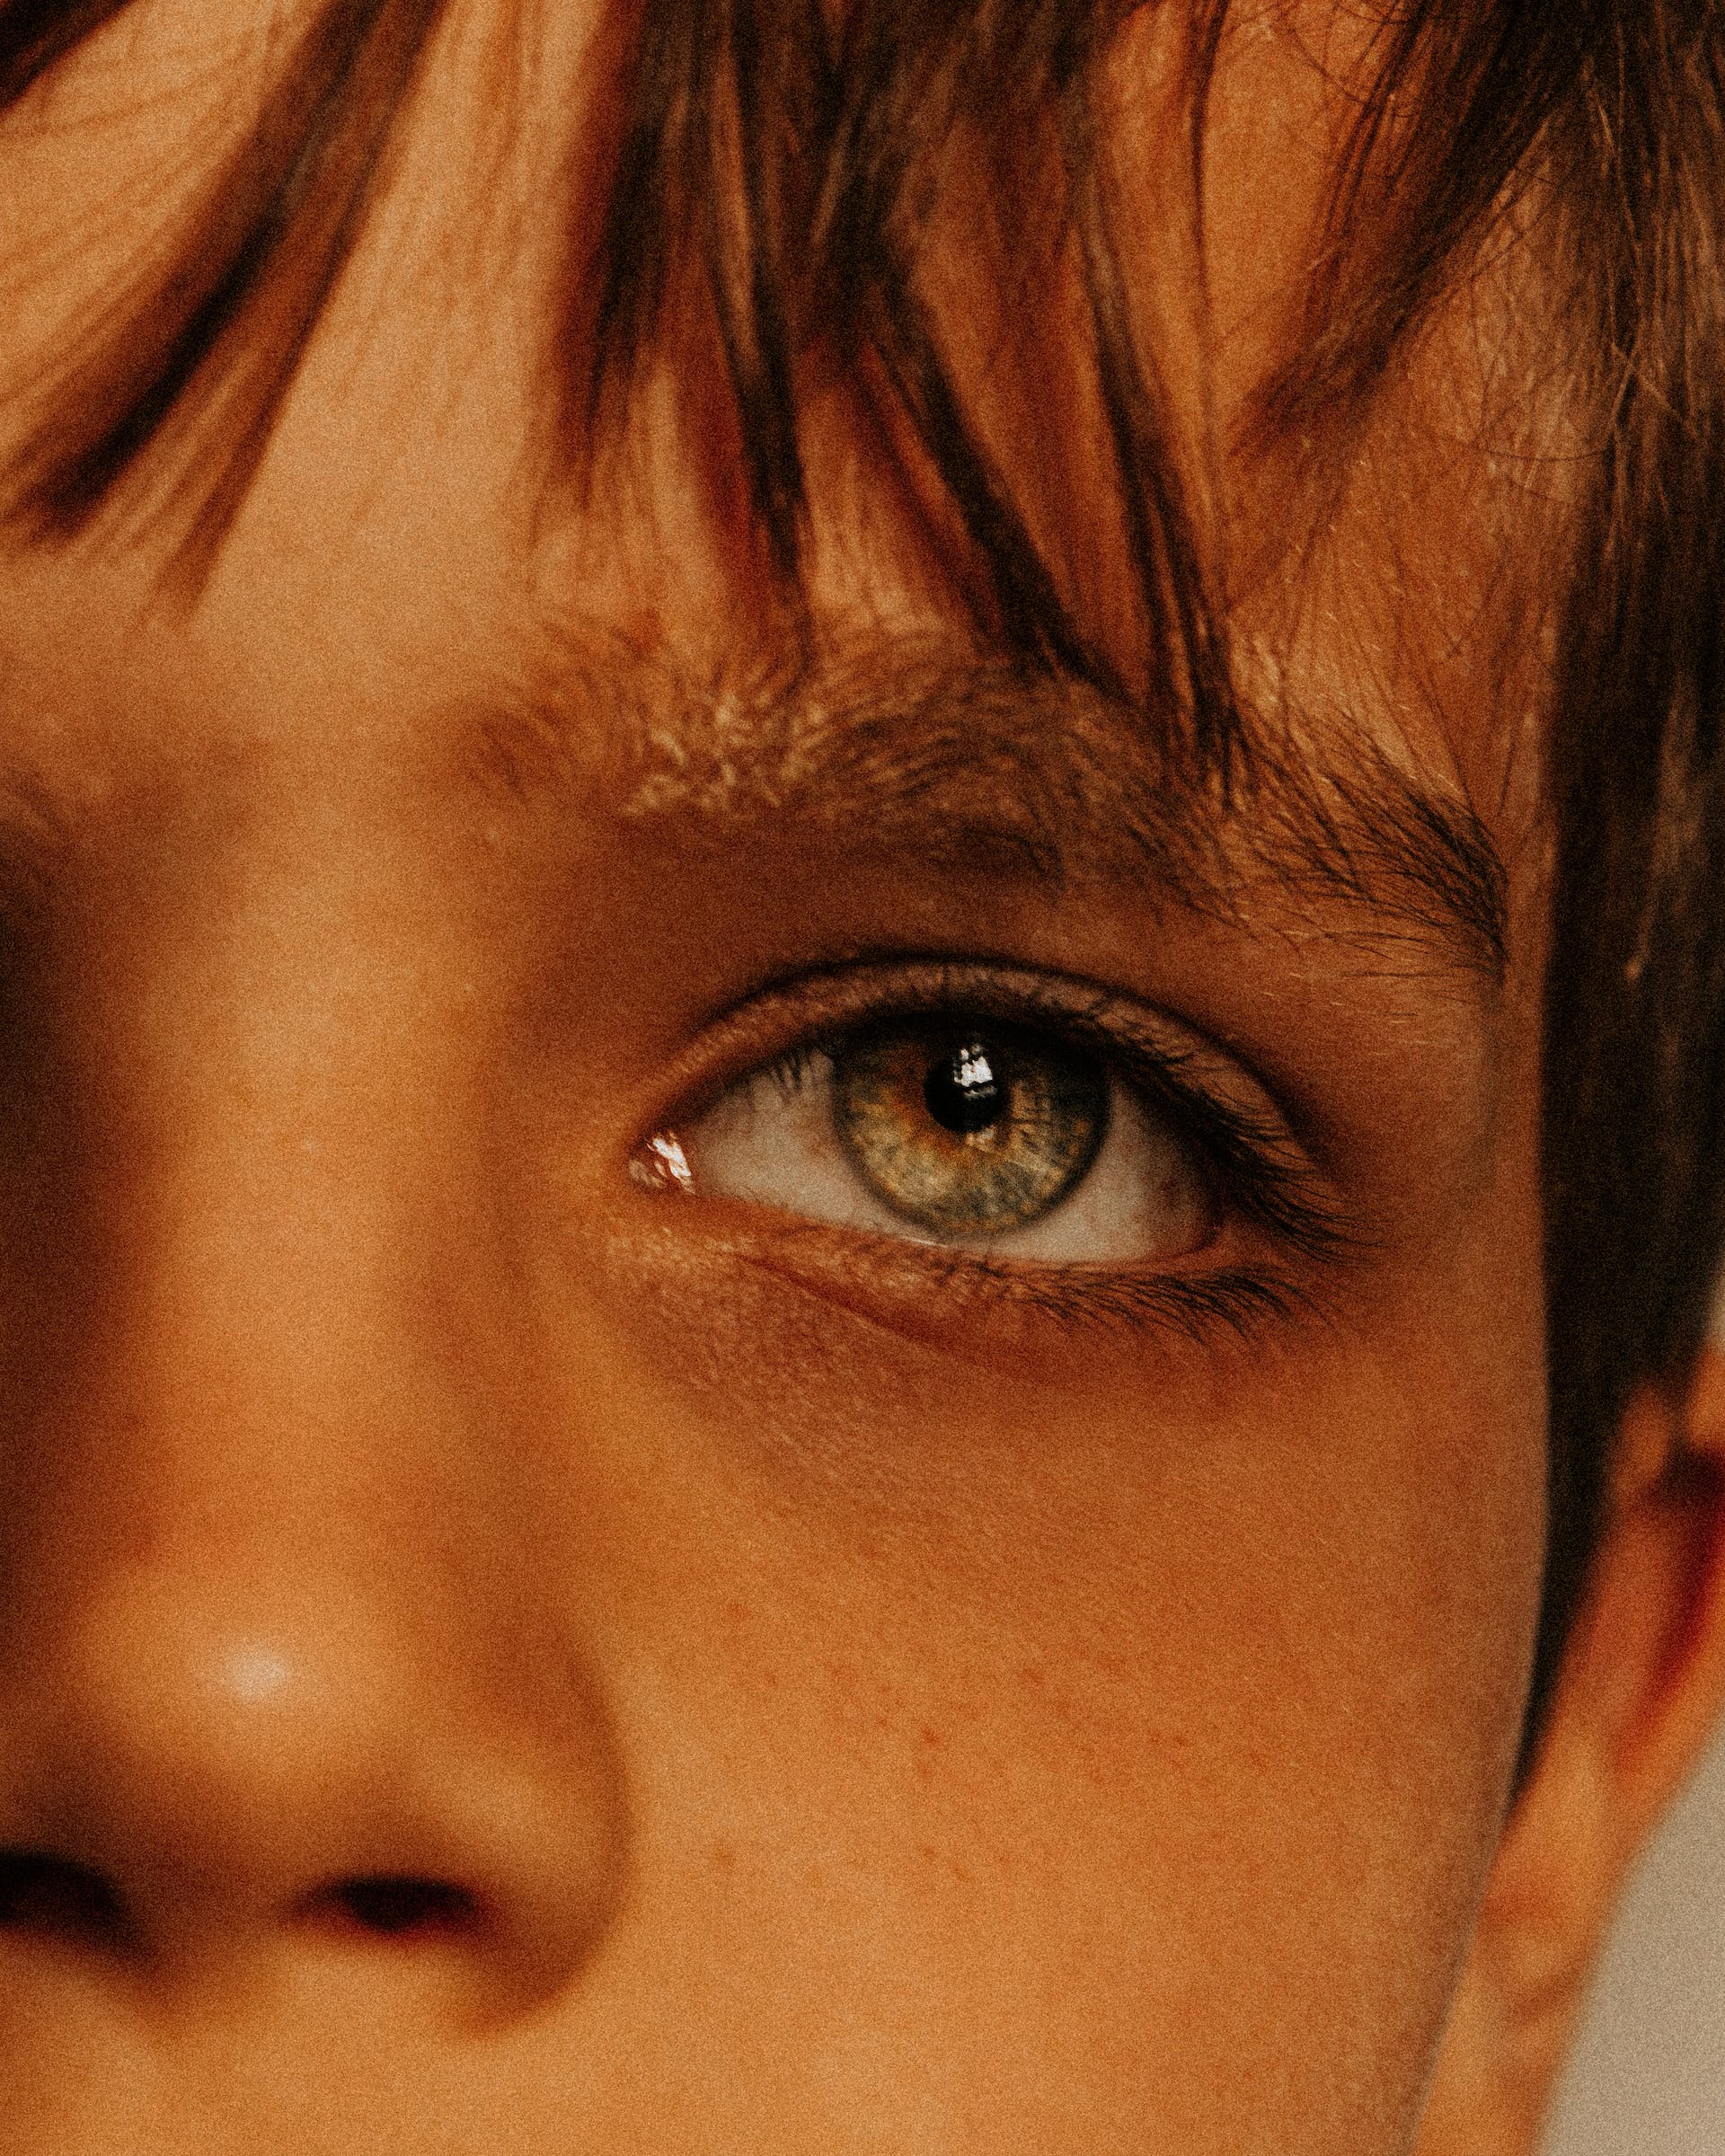 Close-up of a child's eye | Source: Pexels